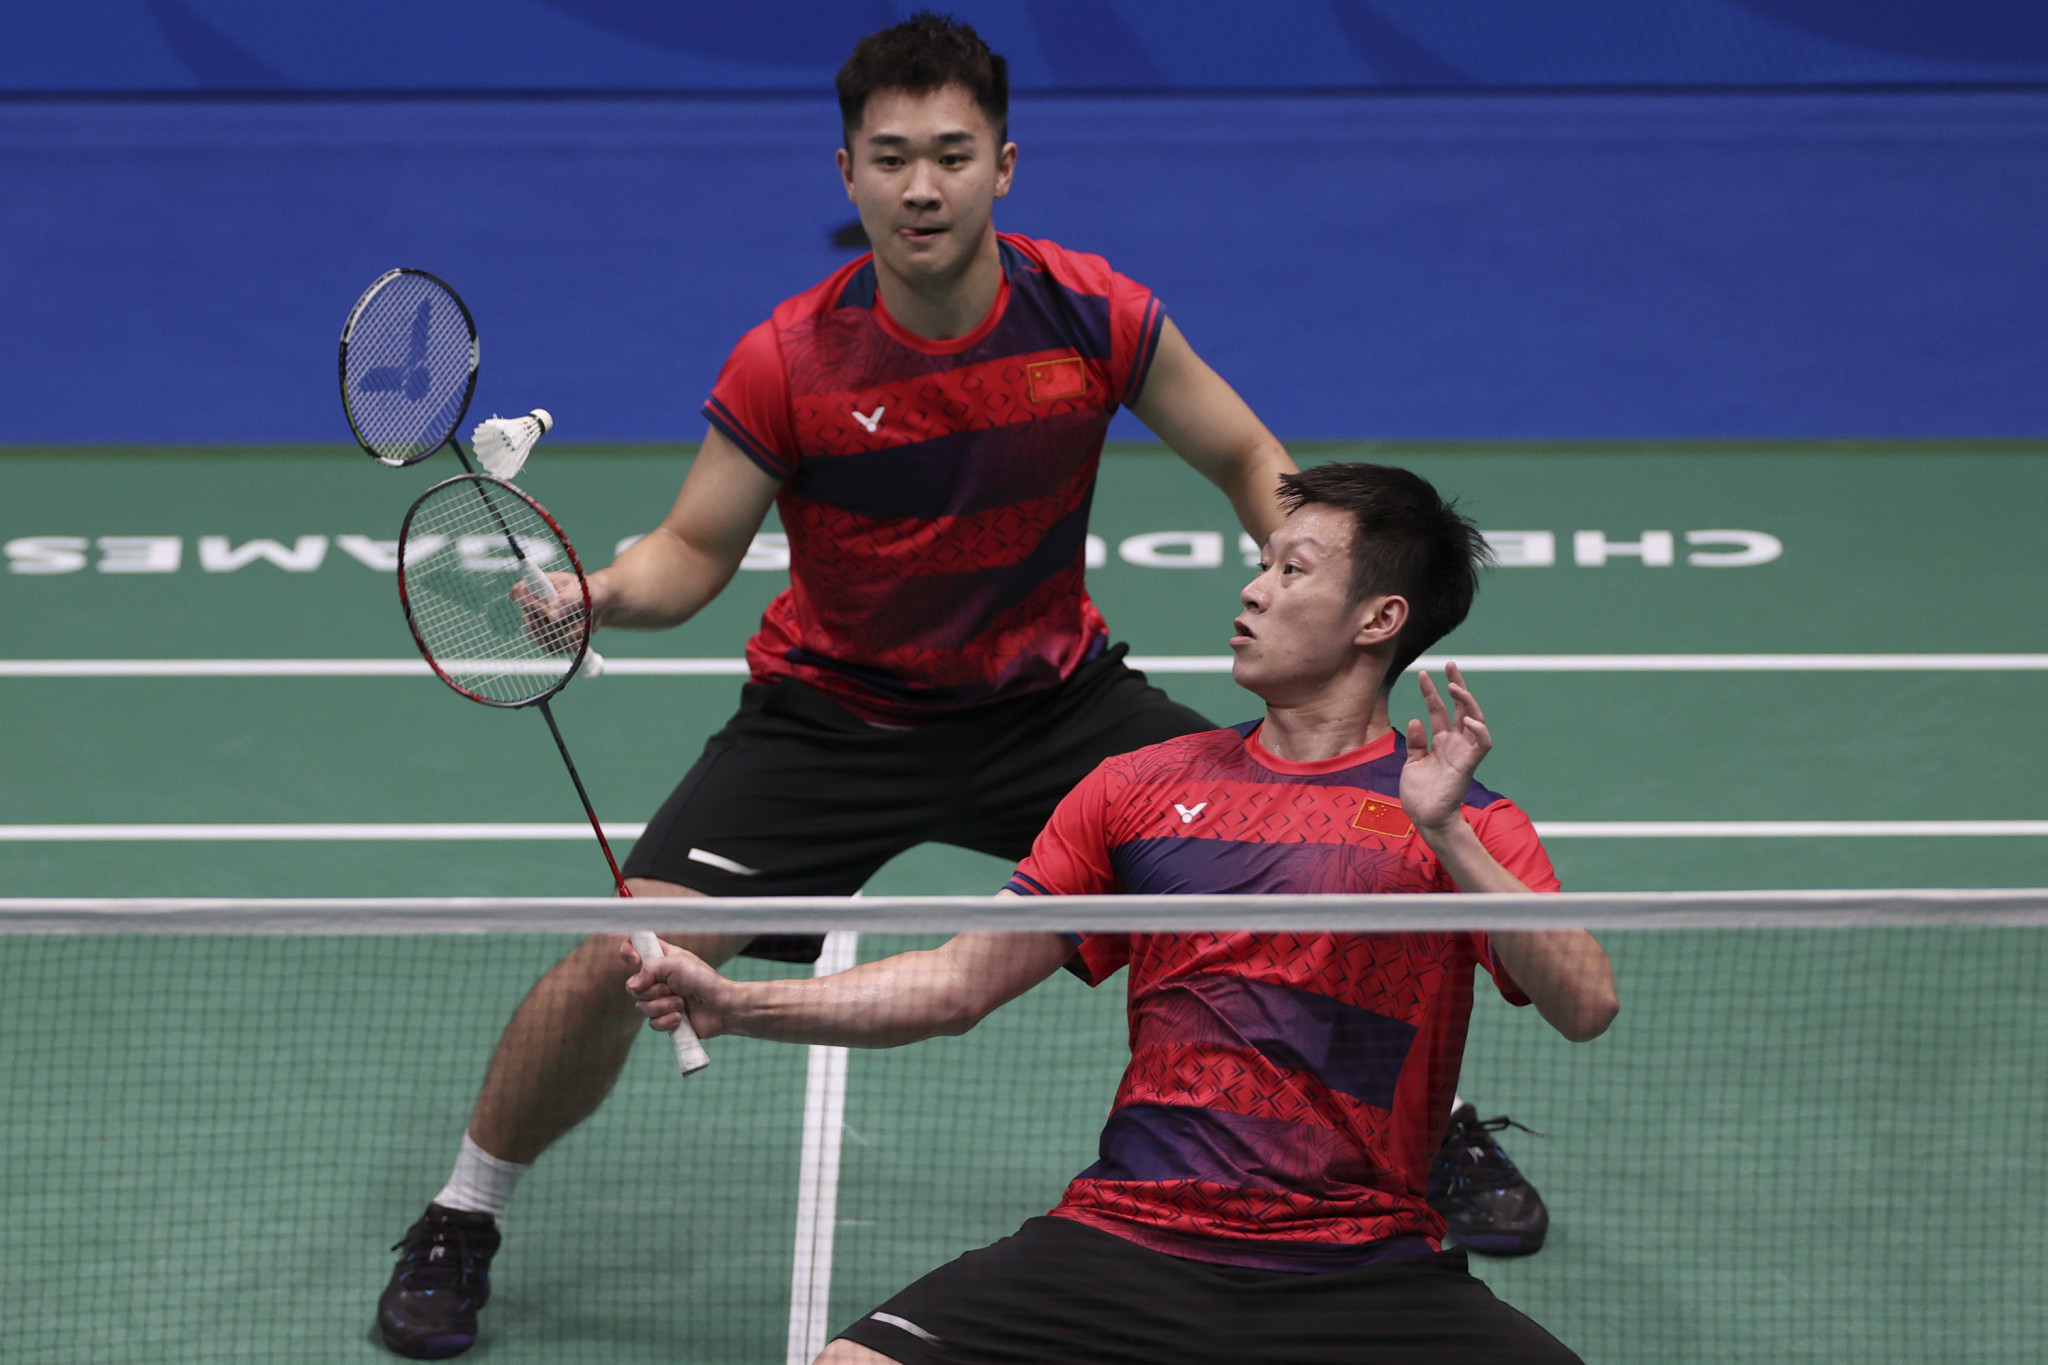 Another all-Chinese contest was played out this time in the men's doubles, with Tan Qiang, left, and Ren Xiangyu emerging victorious ©Chengdu 2021